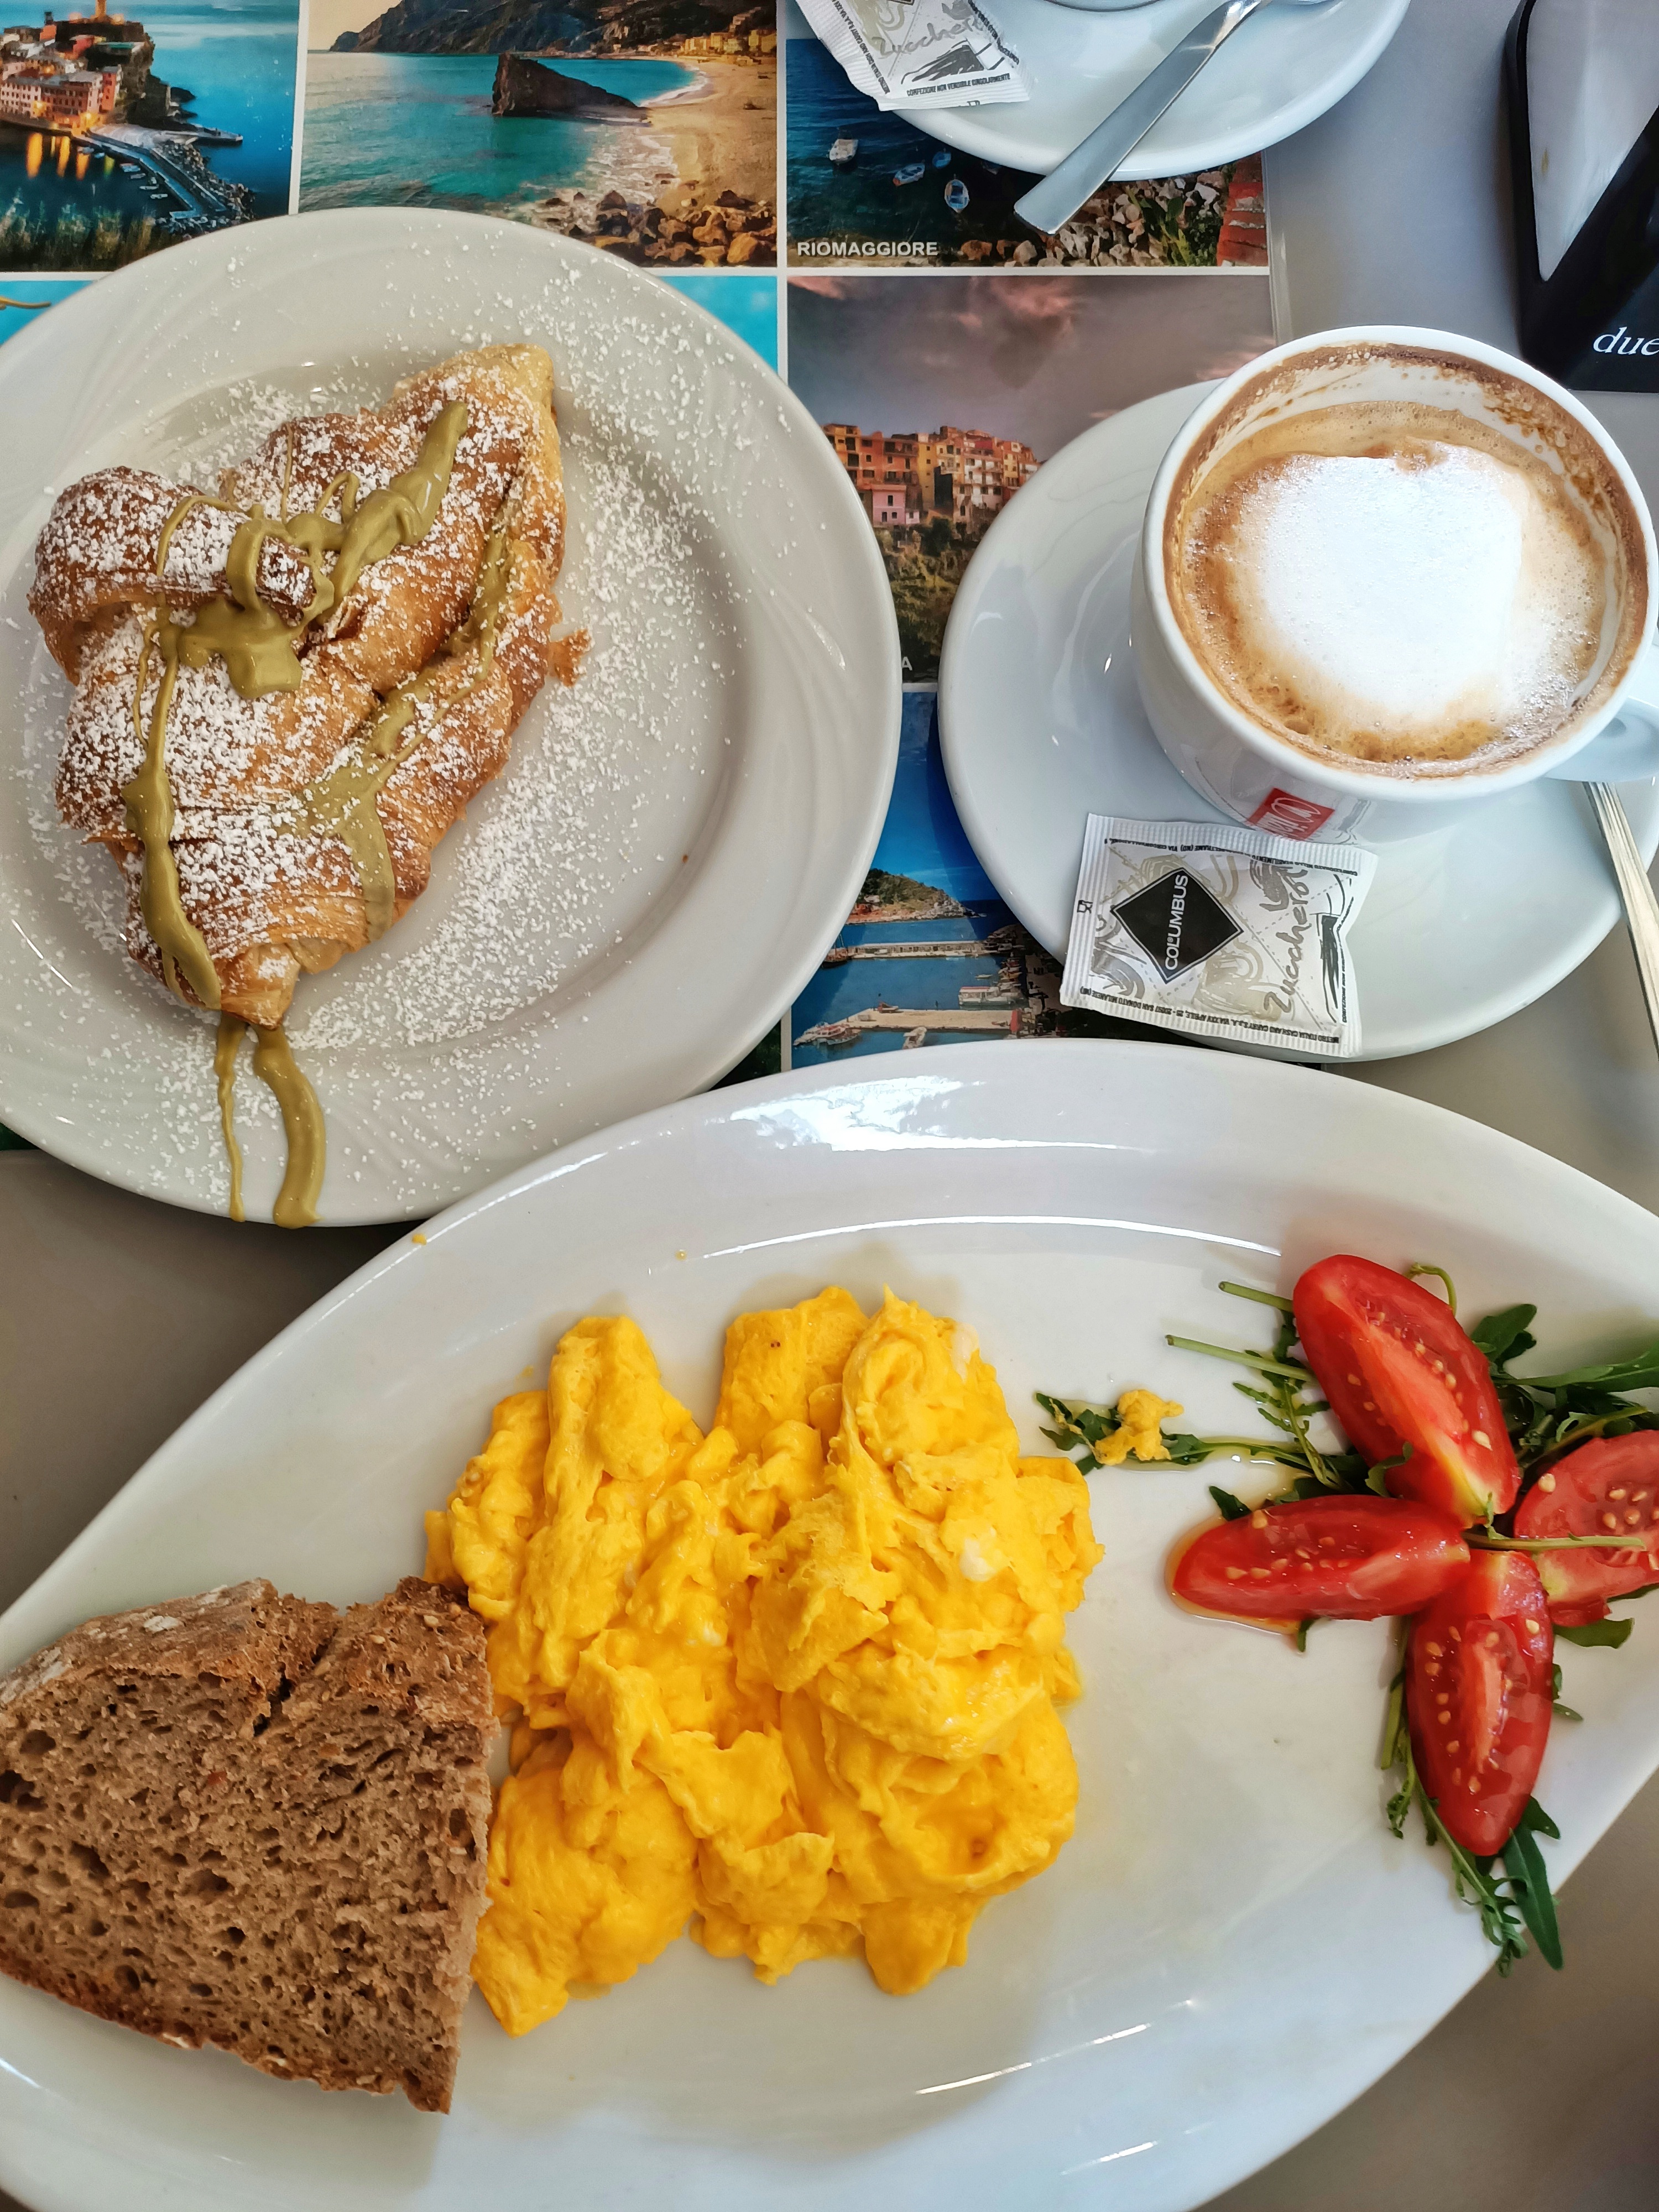 Breakfast at the restaurant Il Pirata delle Cinque Terre, in Vernazza, Italy. The plate contains their delicious scrambled eggs, with a cappuccino on the side and a pistacchio croissant.